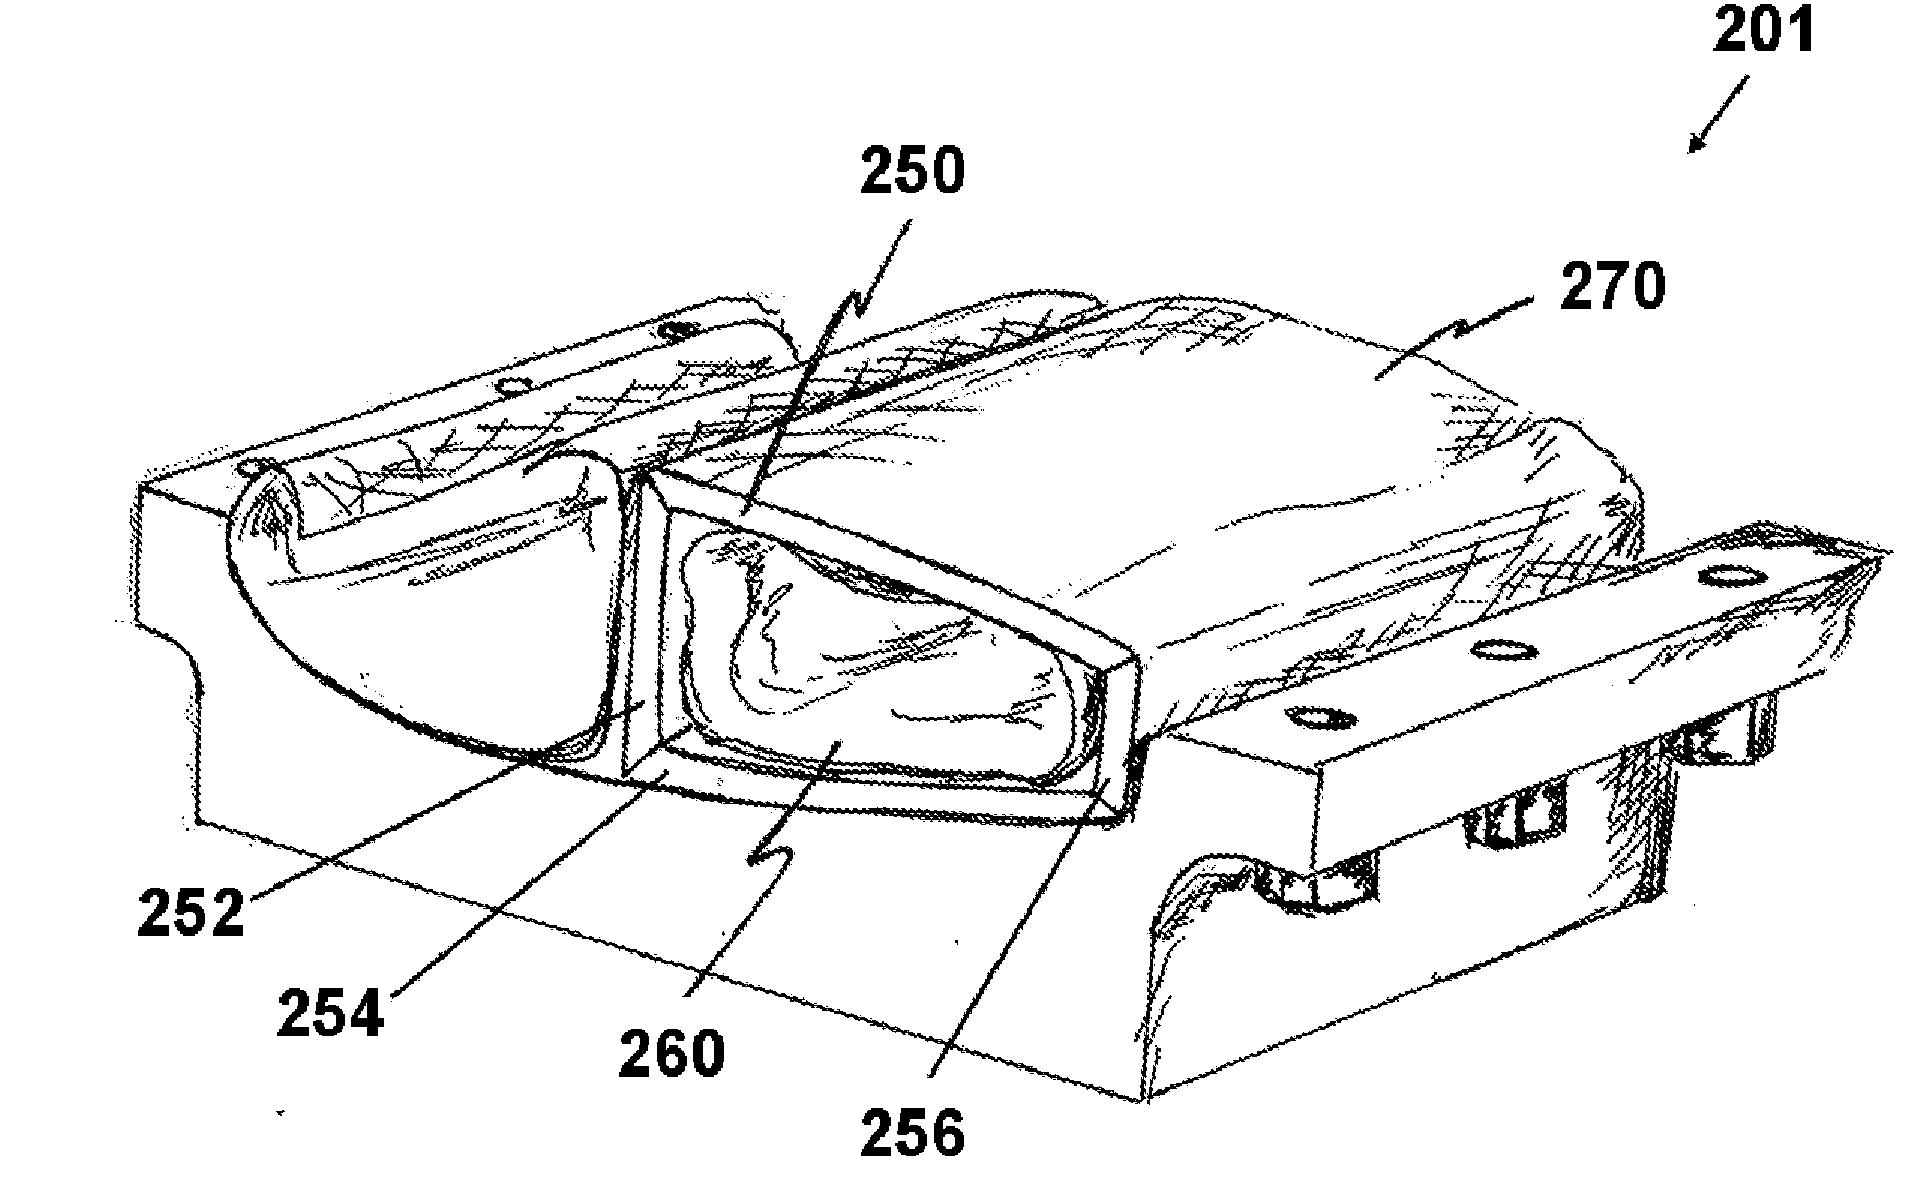 Self-Tooling Composite Structure